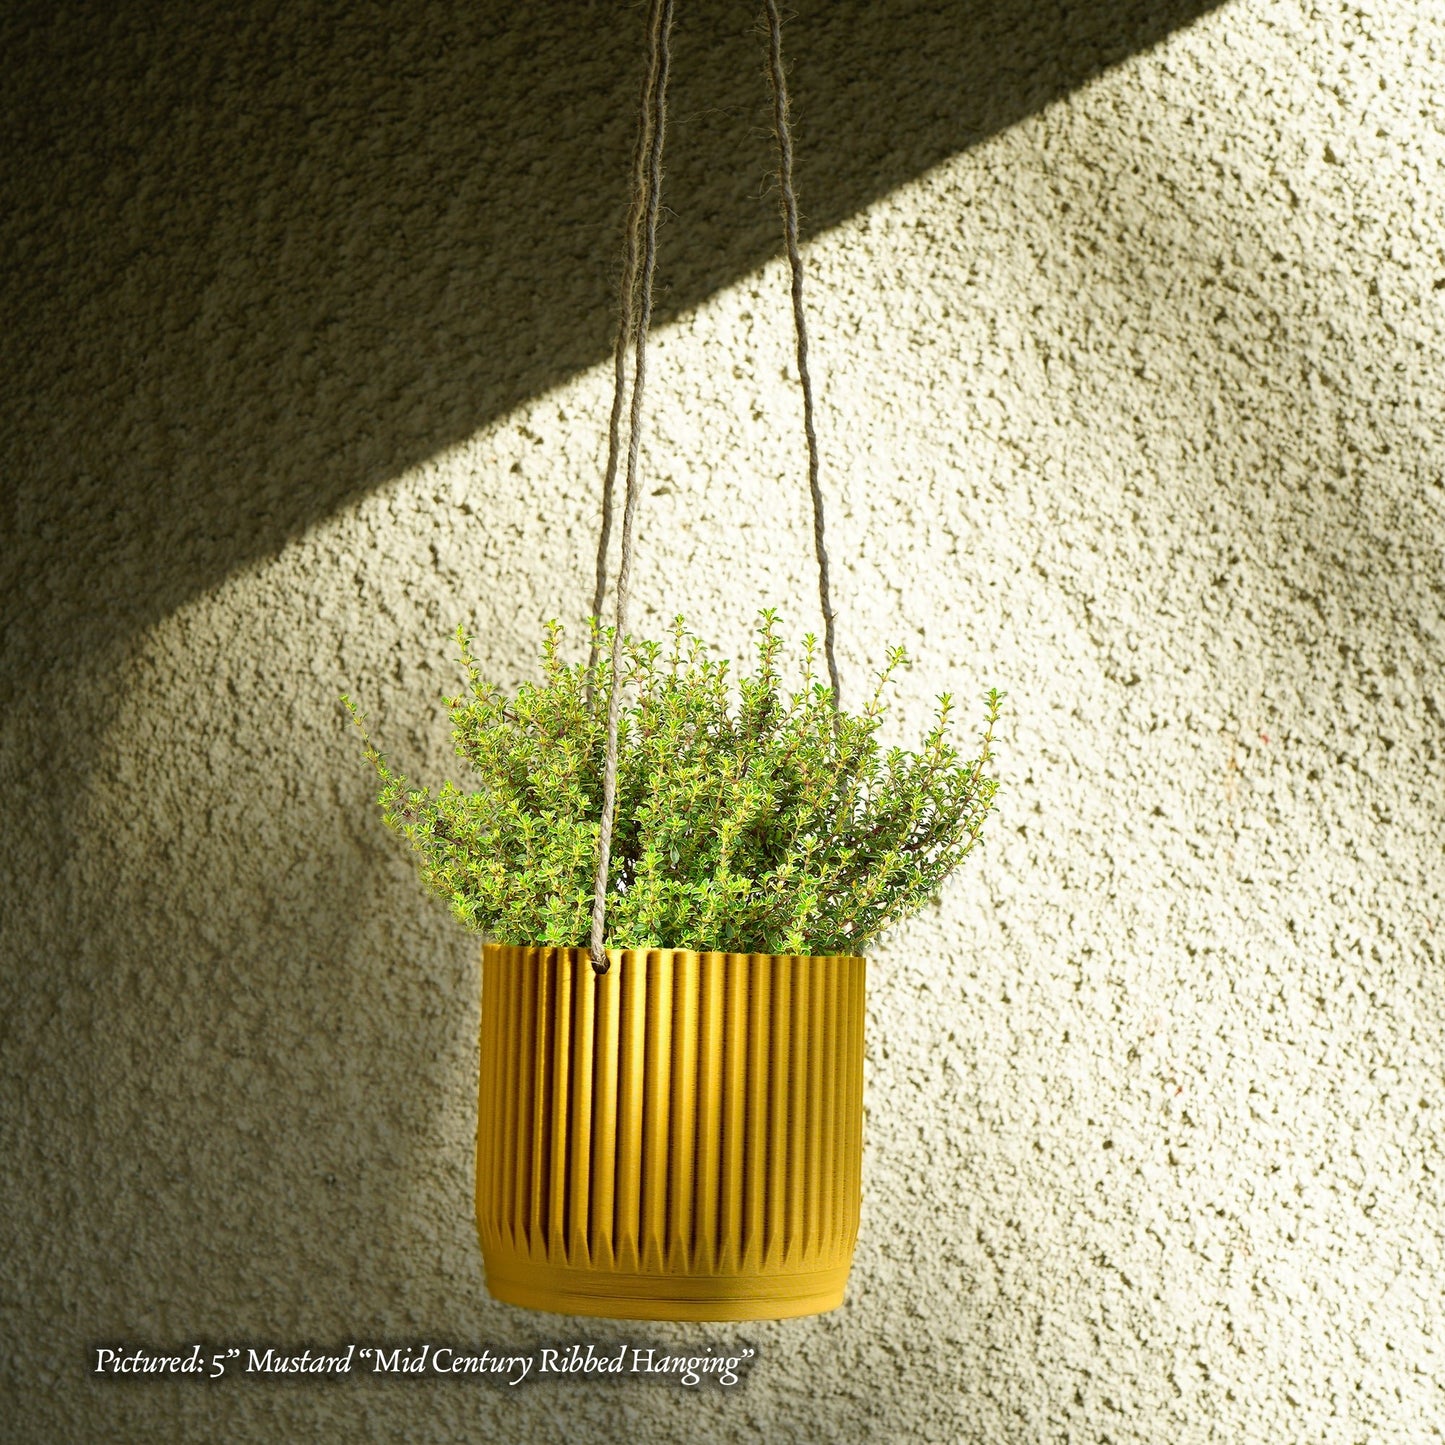 Mid Century Ribbed Hanging Plant Pots - Rosebud HomeGoods Black With Drainage 4” MODERN HOME GOOD